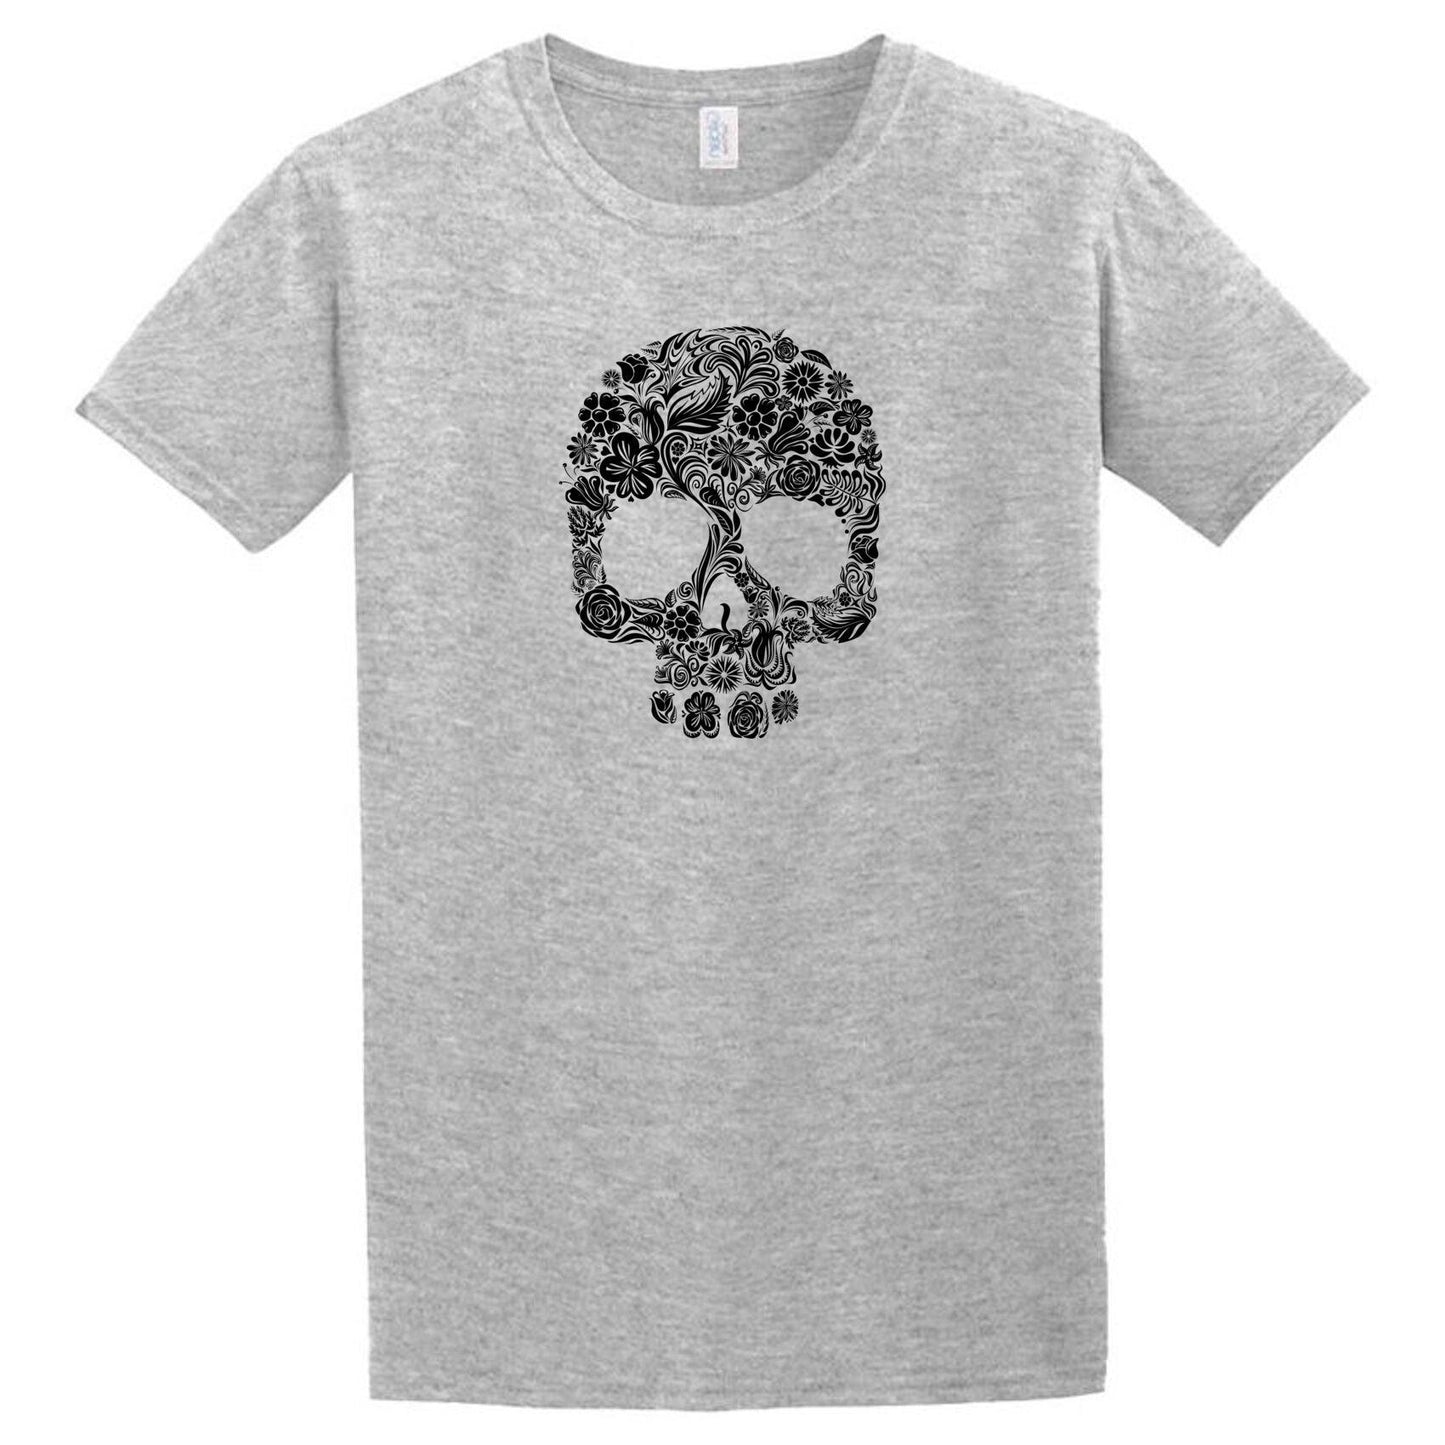 A Twisted Gifts Skull T-Shirt.